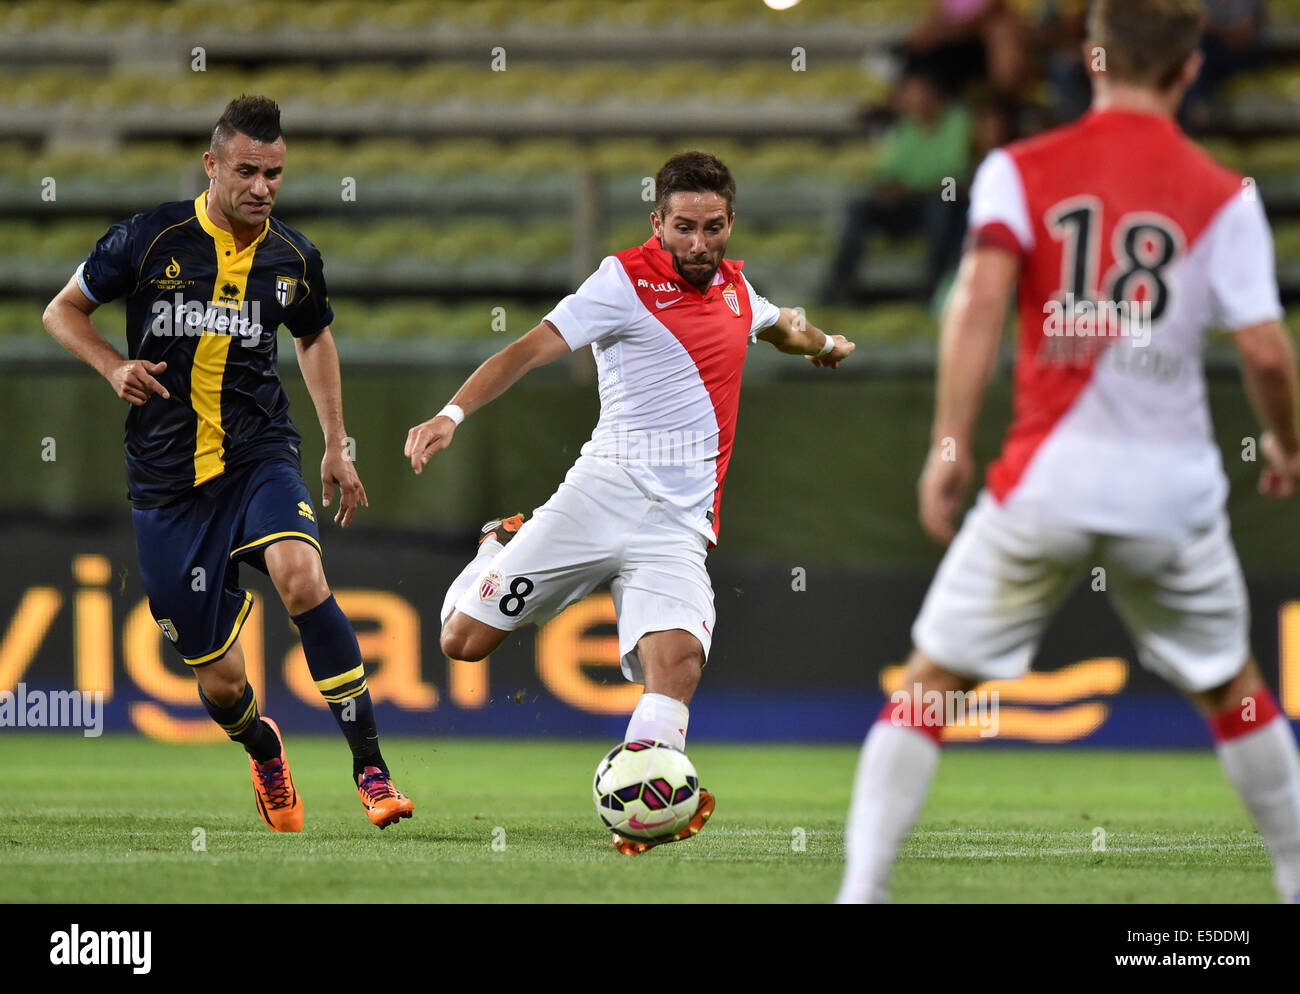 Parma, Italy. 28th July, 2014. Joao Moutinho (C) of AS Monaco shoots during a friendly match between AS Monaco and FC Parma in Parma, Italy, July 28, 2014. AS Monaco won 2-0. © Alberto Lingria/Xinhua/Alamy Live News Stock Photo